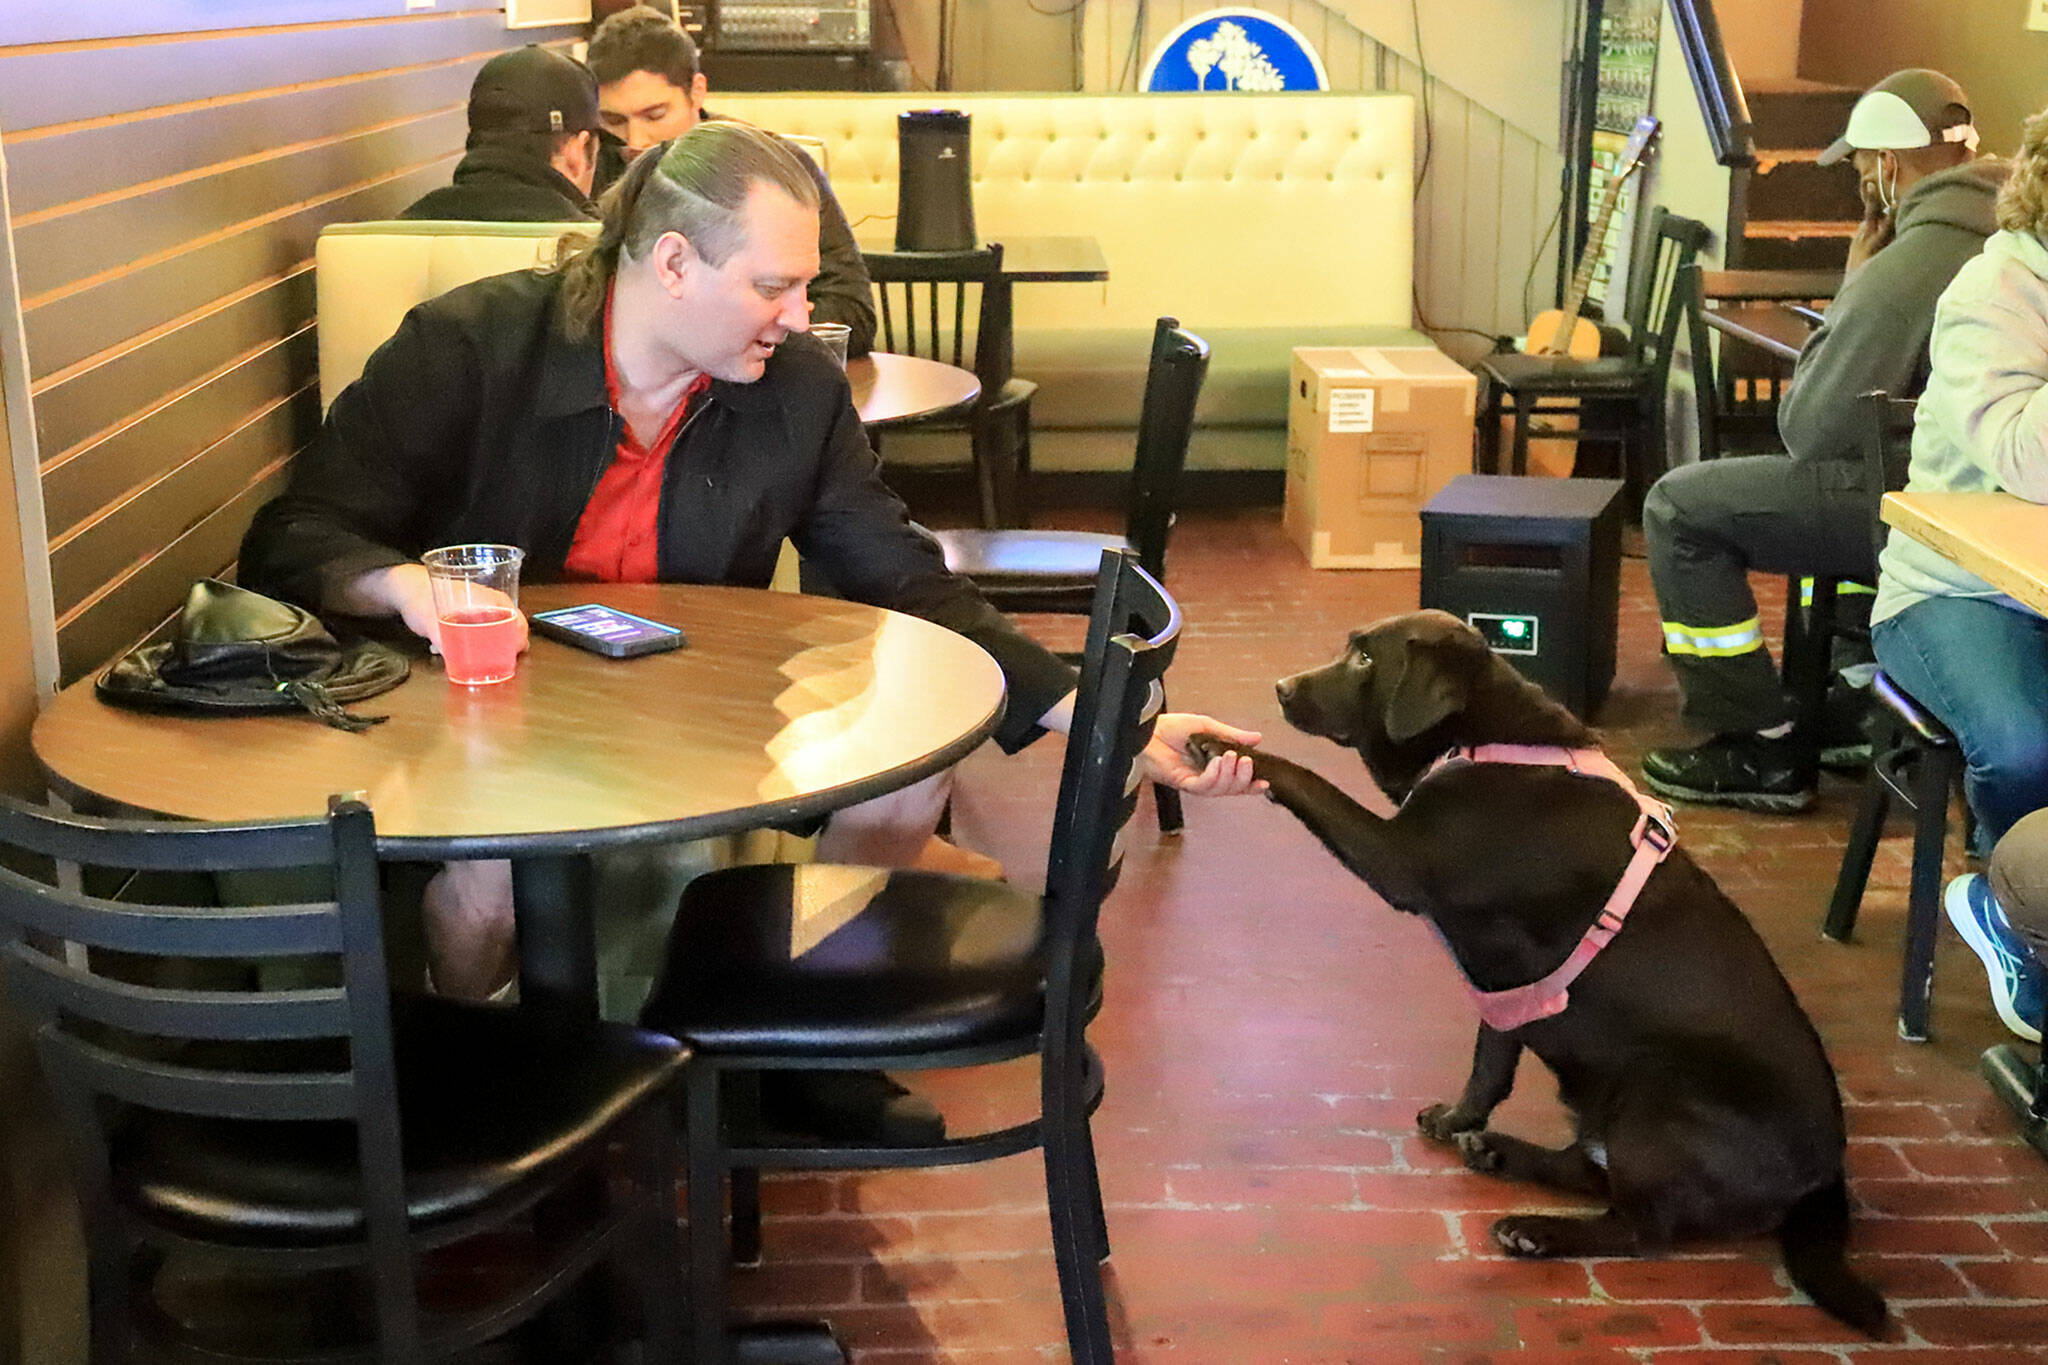 Regulars Michael Fay and Java greet one another Friday afternoon at Brews Almighty in Everett. (Kevin Clark / The Herald)